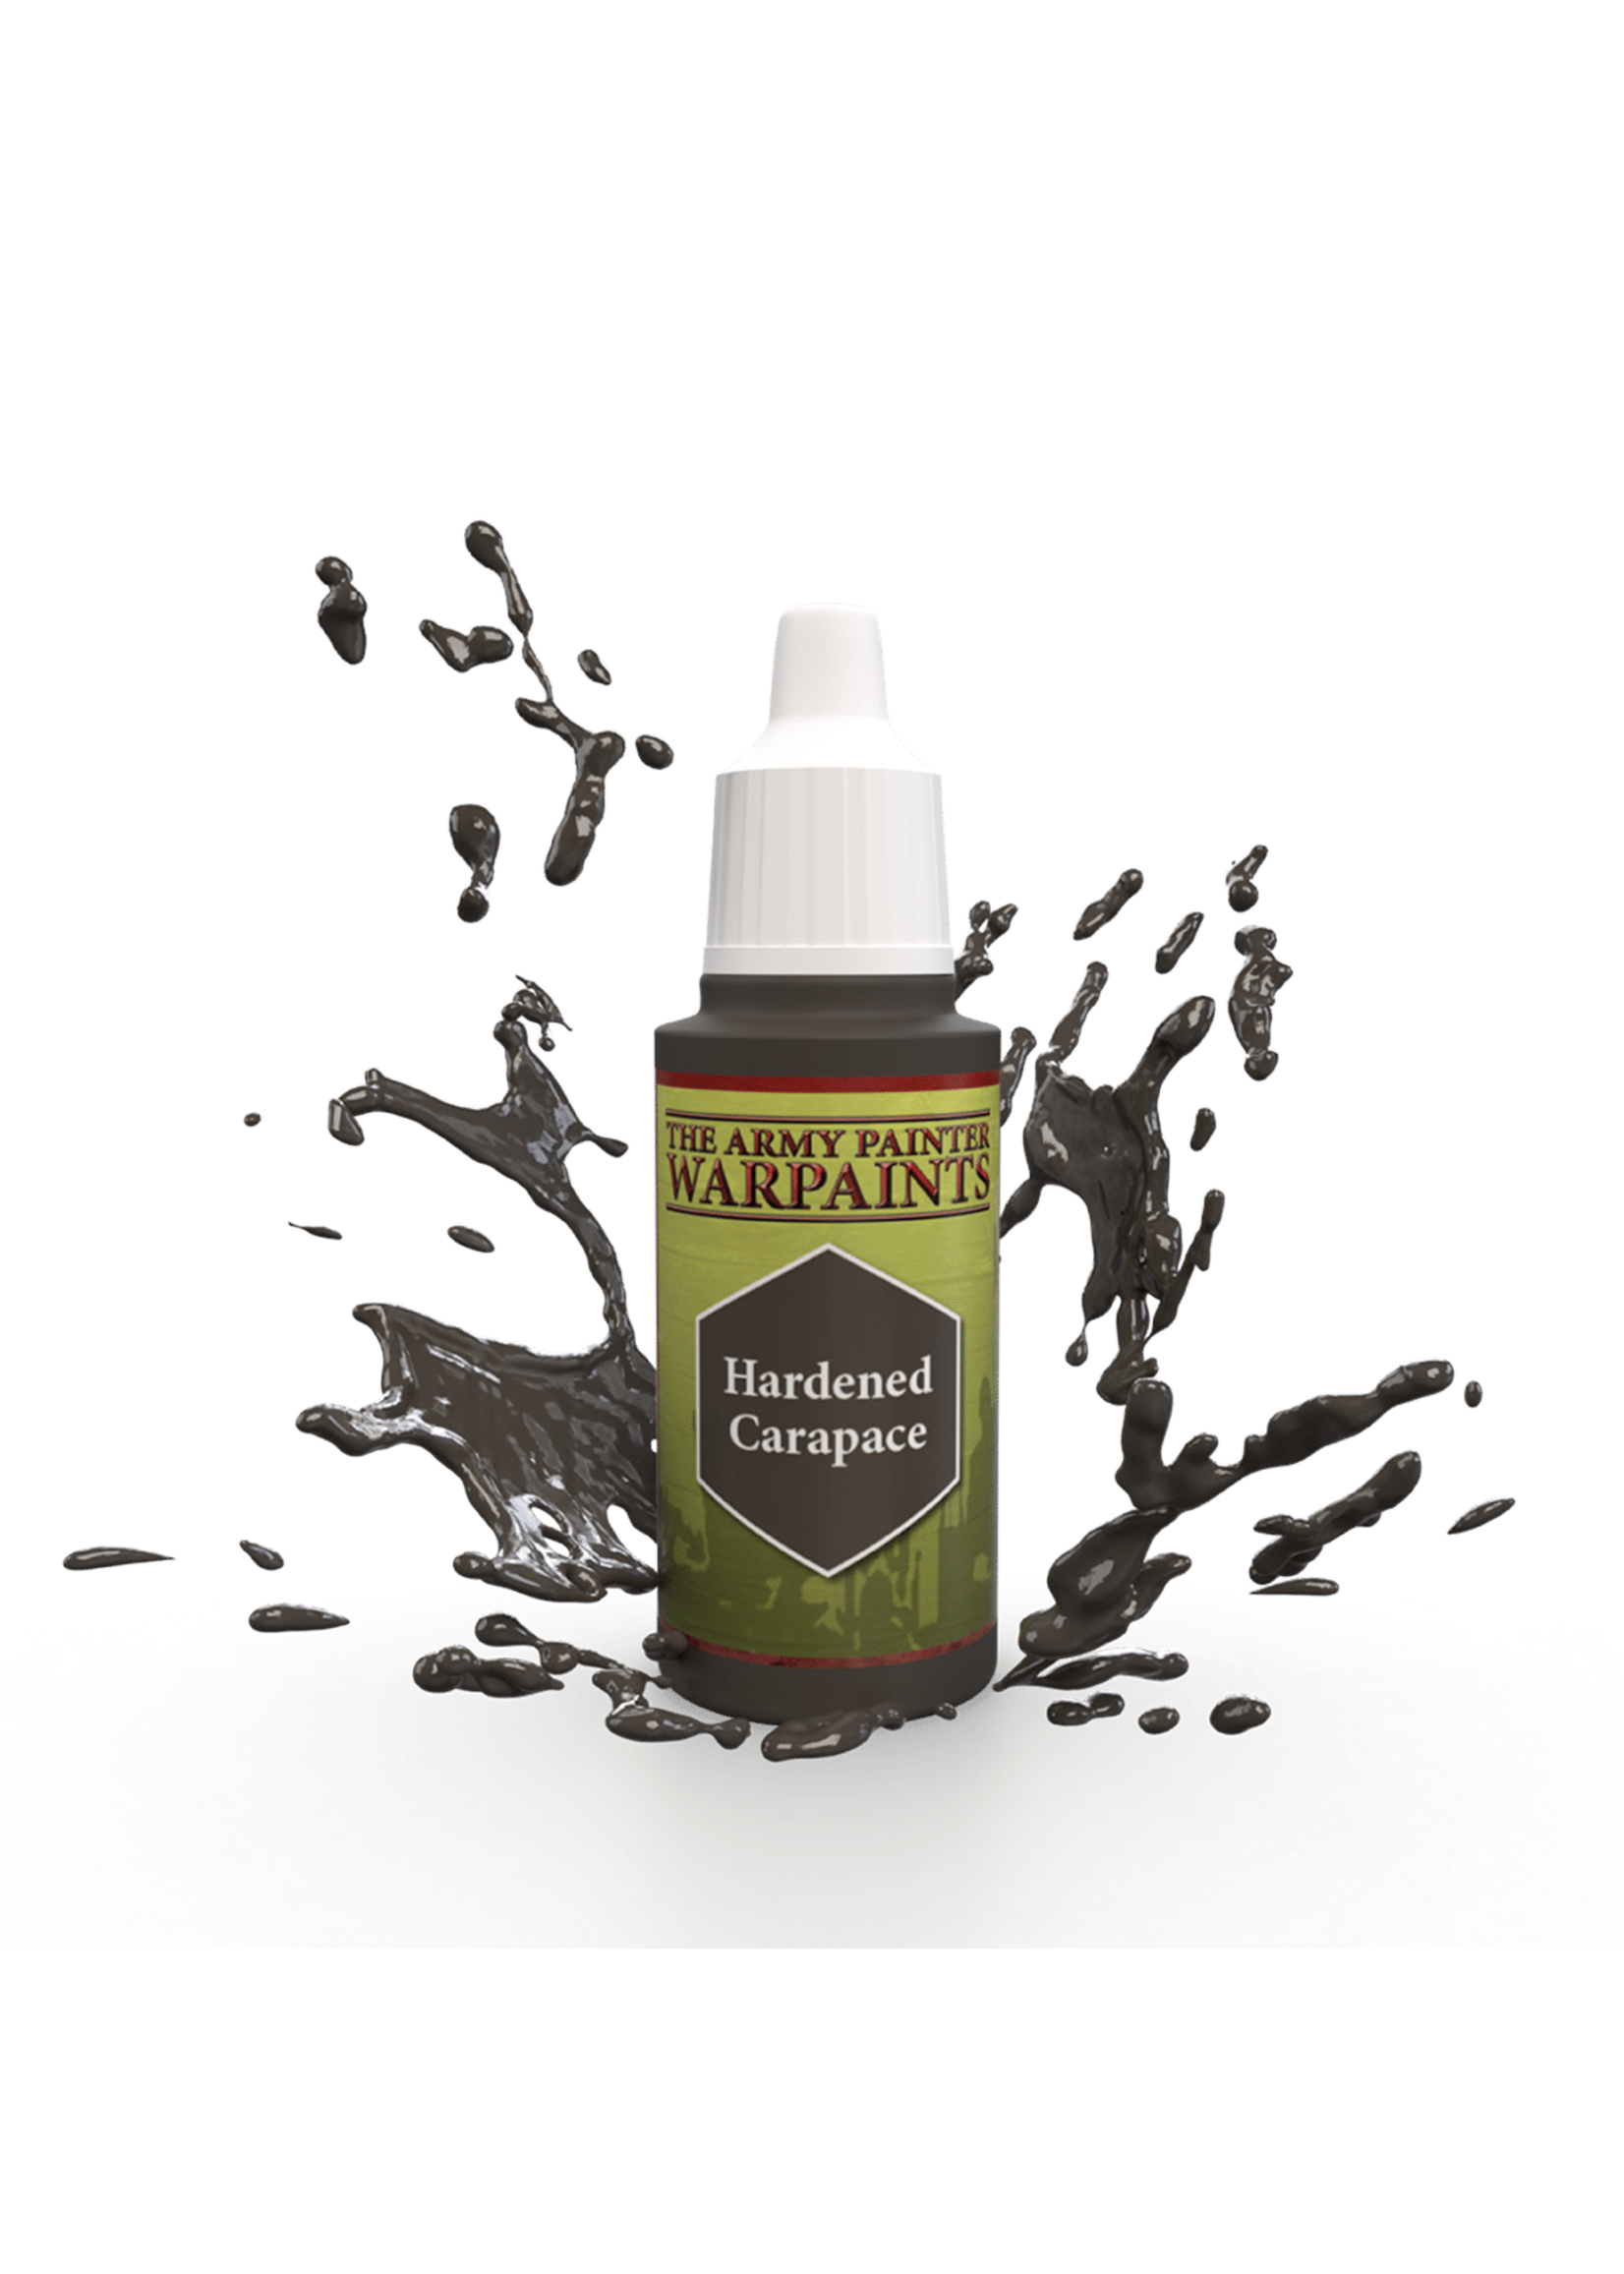 ARMY PAINTER WARPAINTS HARDENED CARAPACE (18ML)